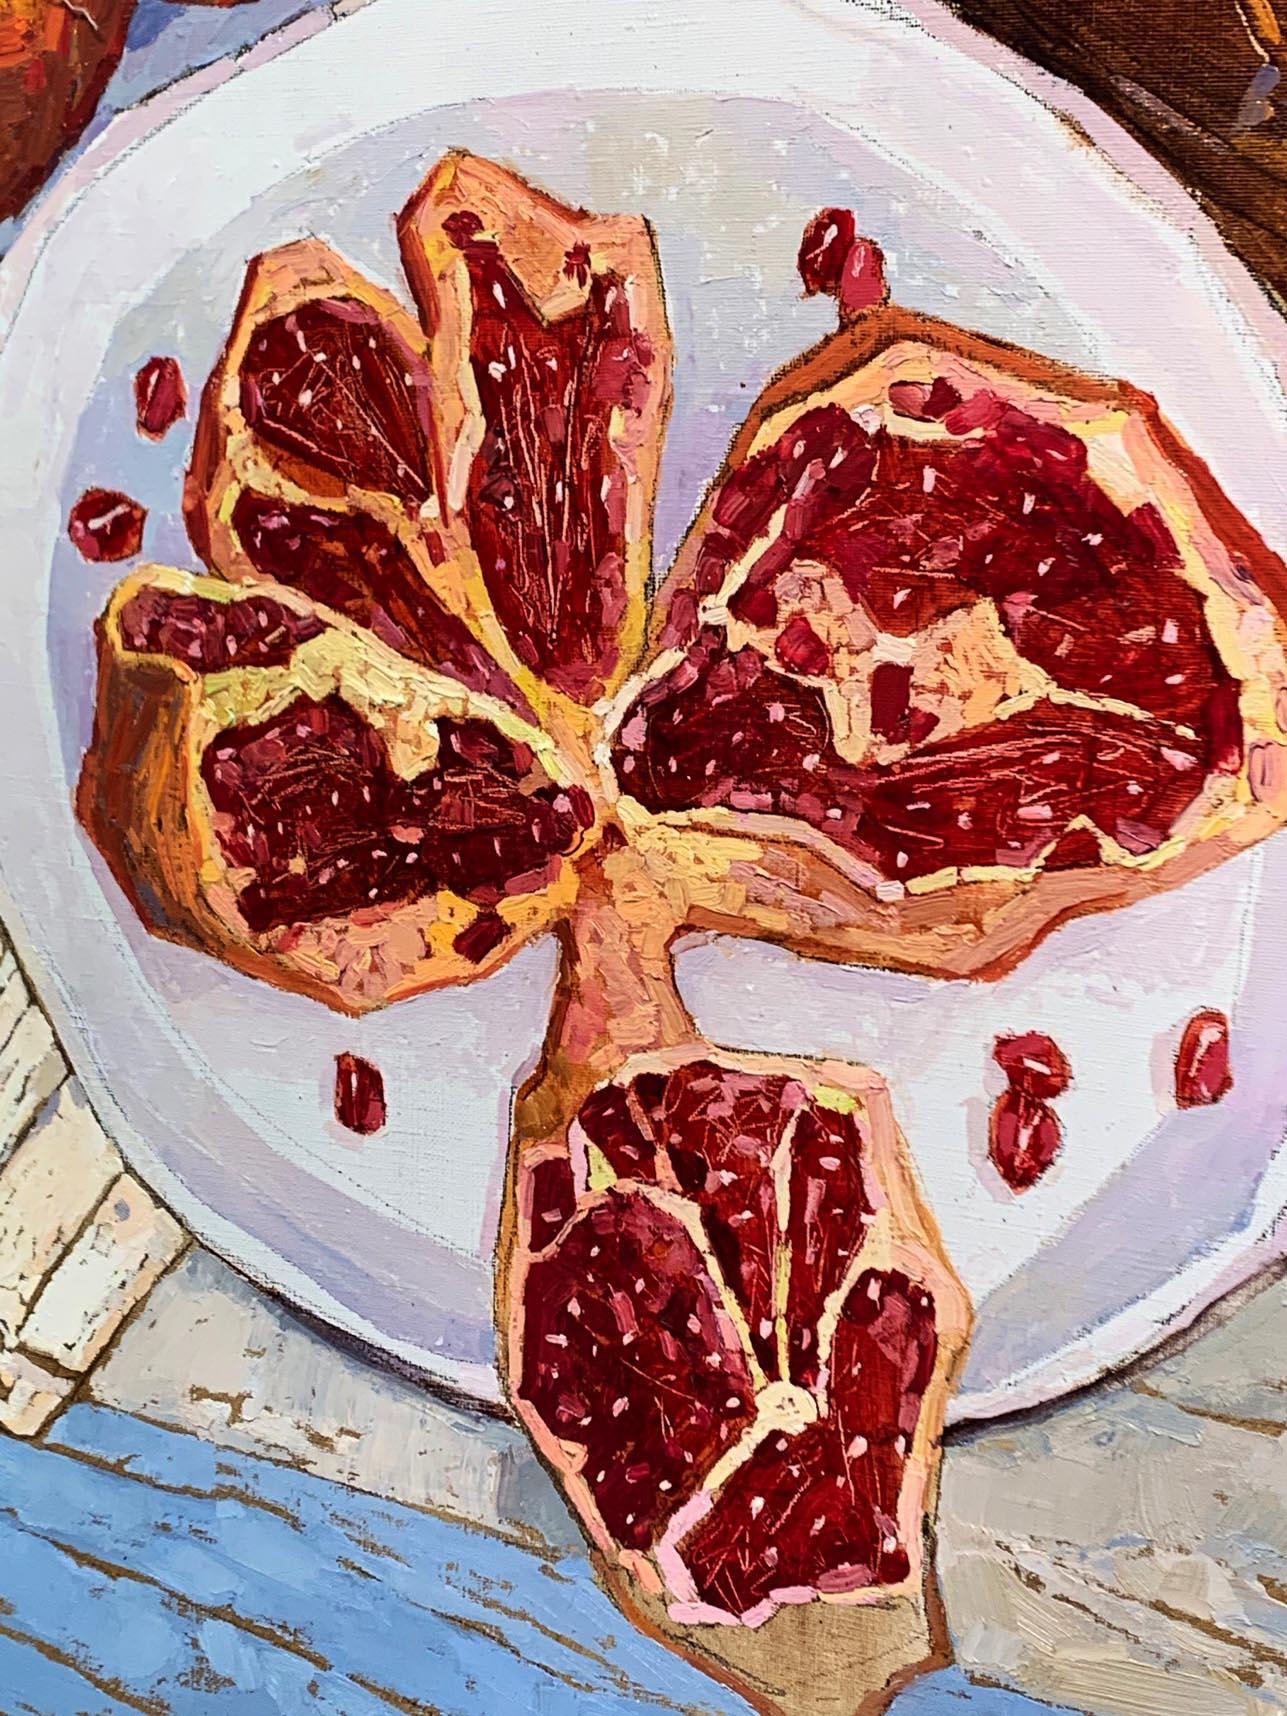 Pomegranate Juice - Expressionist Painting by Alexander Britsev